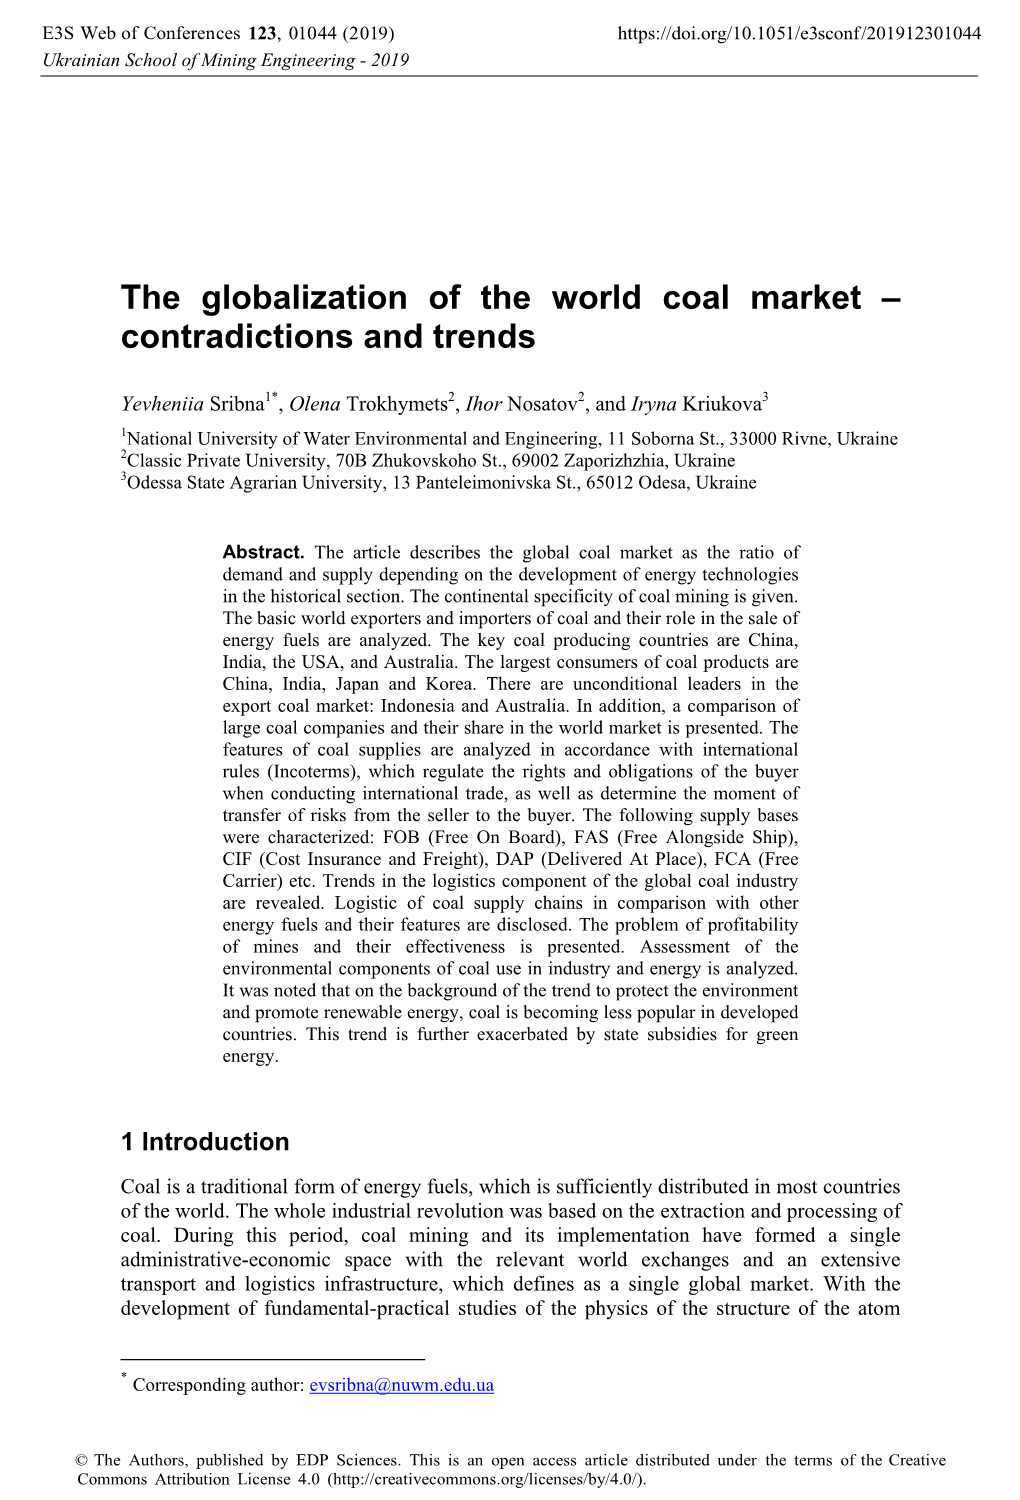 The Globalization of the World Coal Market – Contradictions and Trends